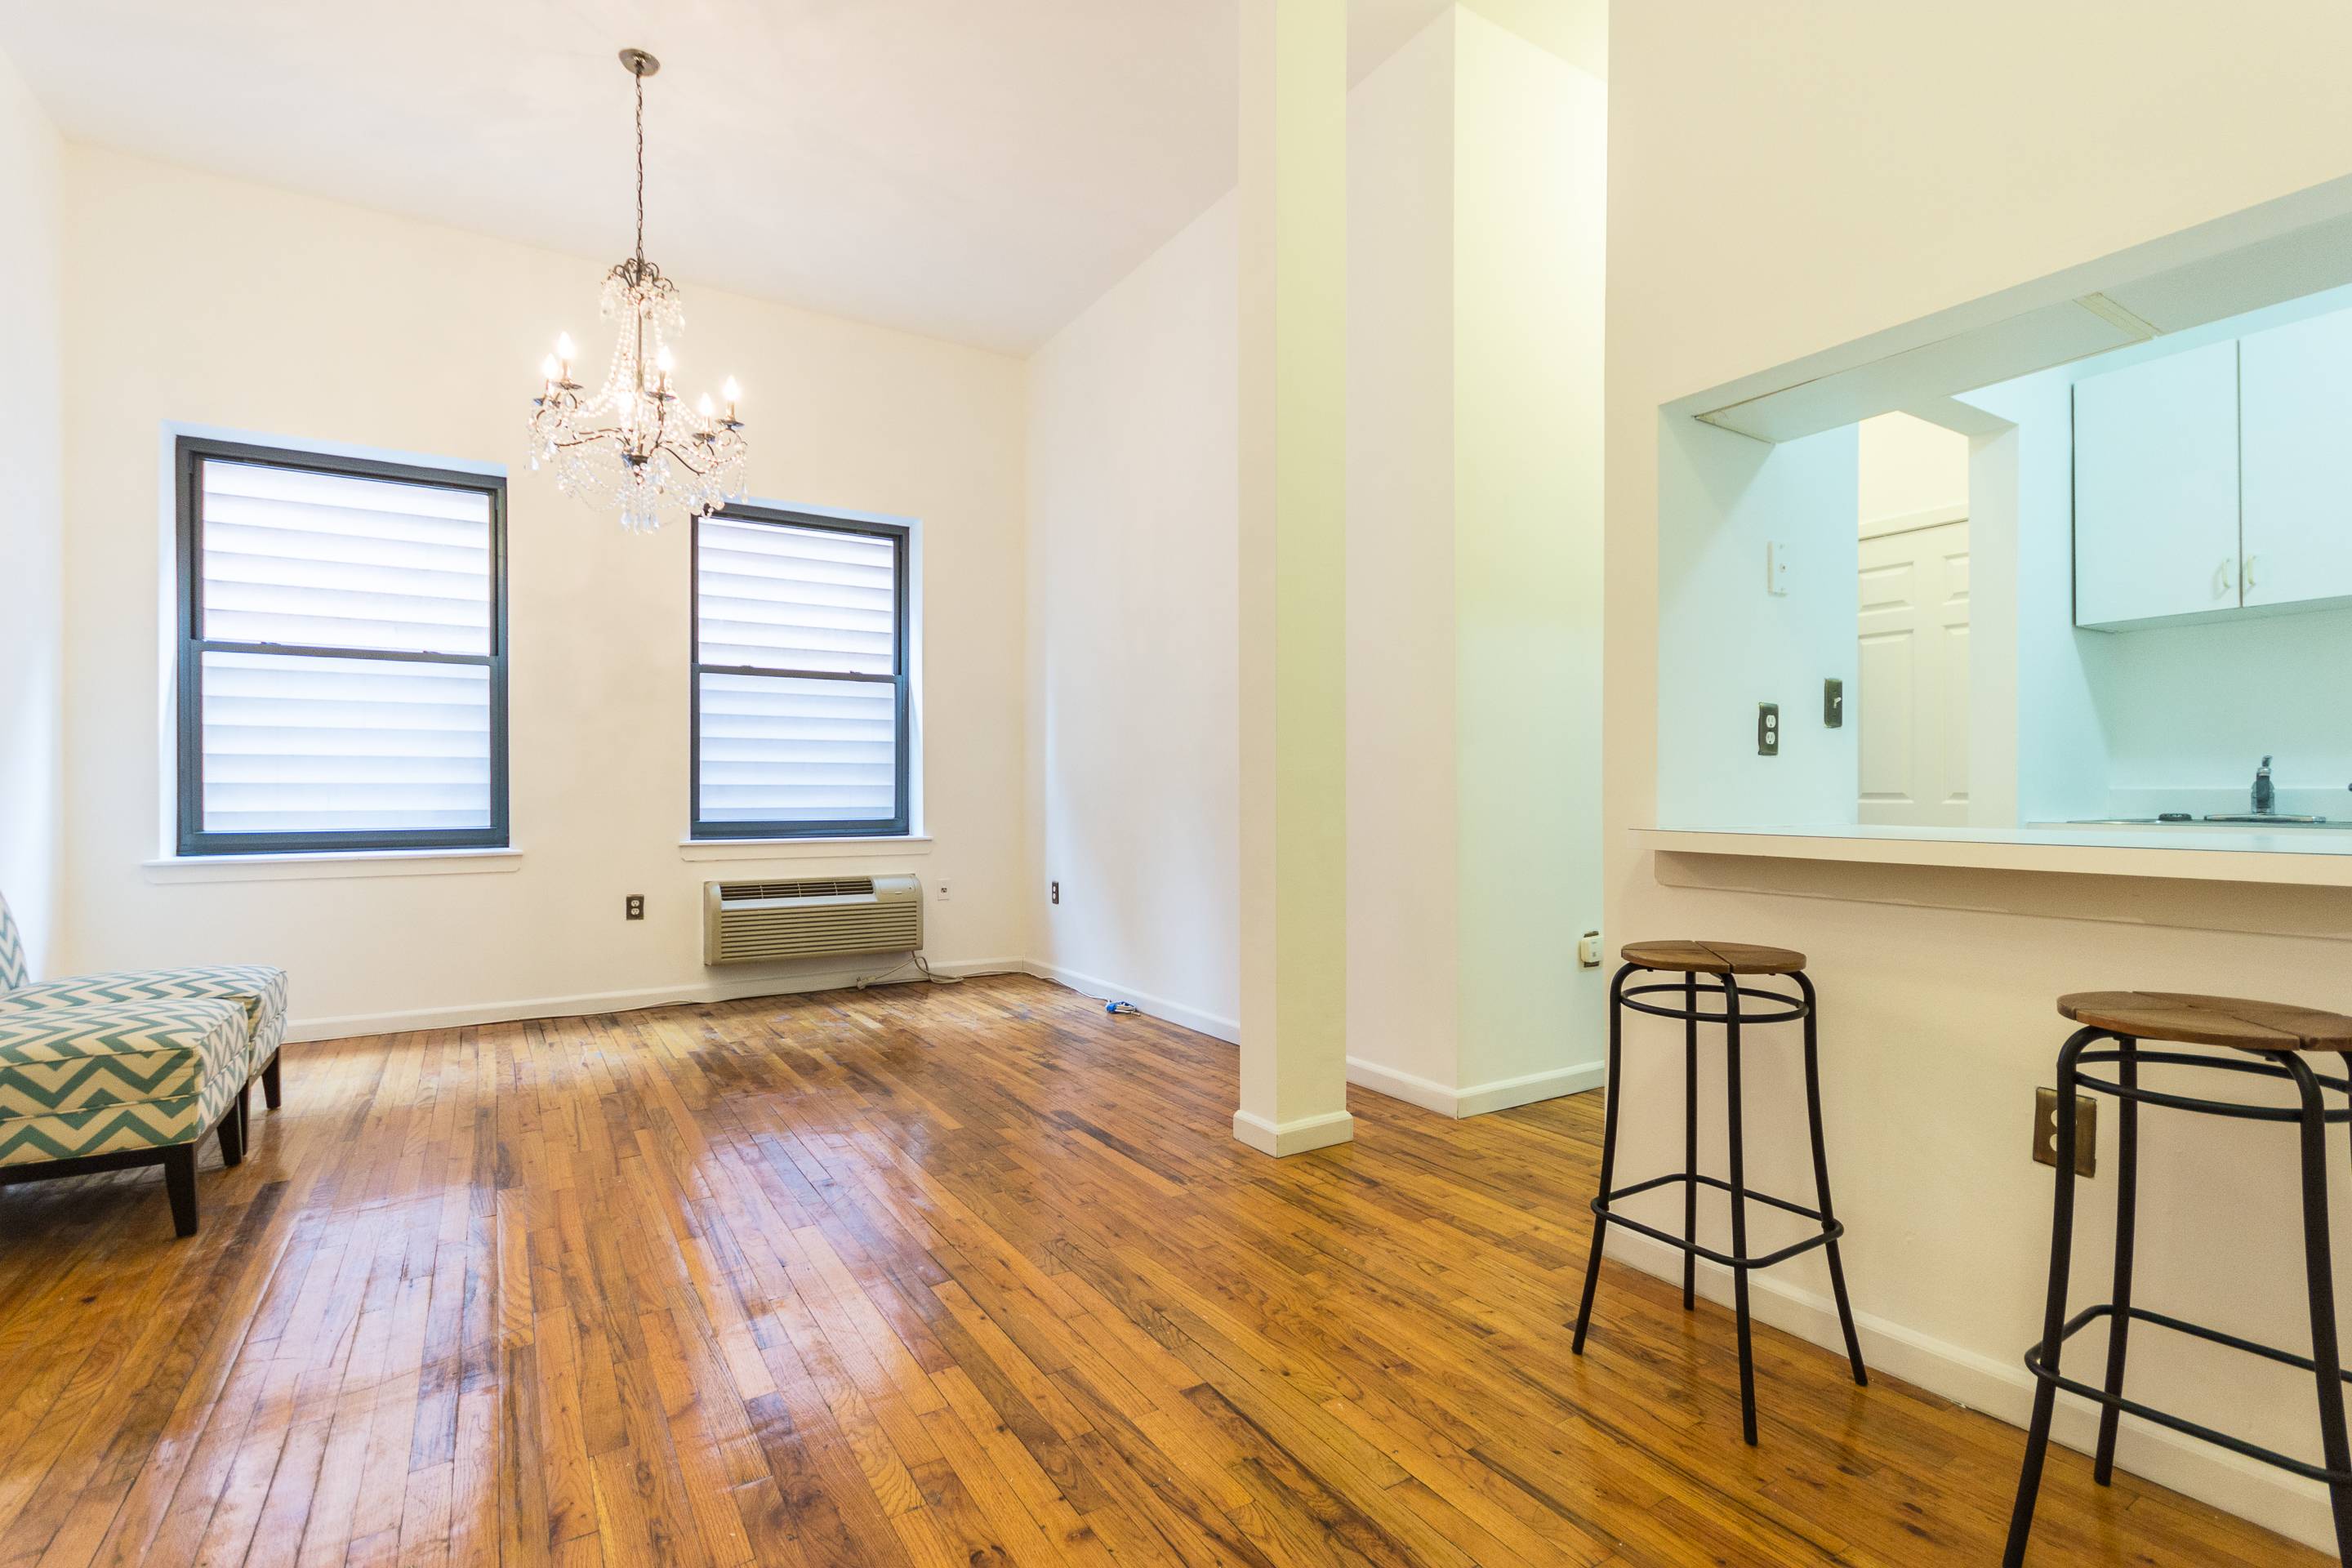 1BR/1BA Located in Prime Jersey City Heights